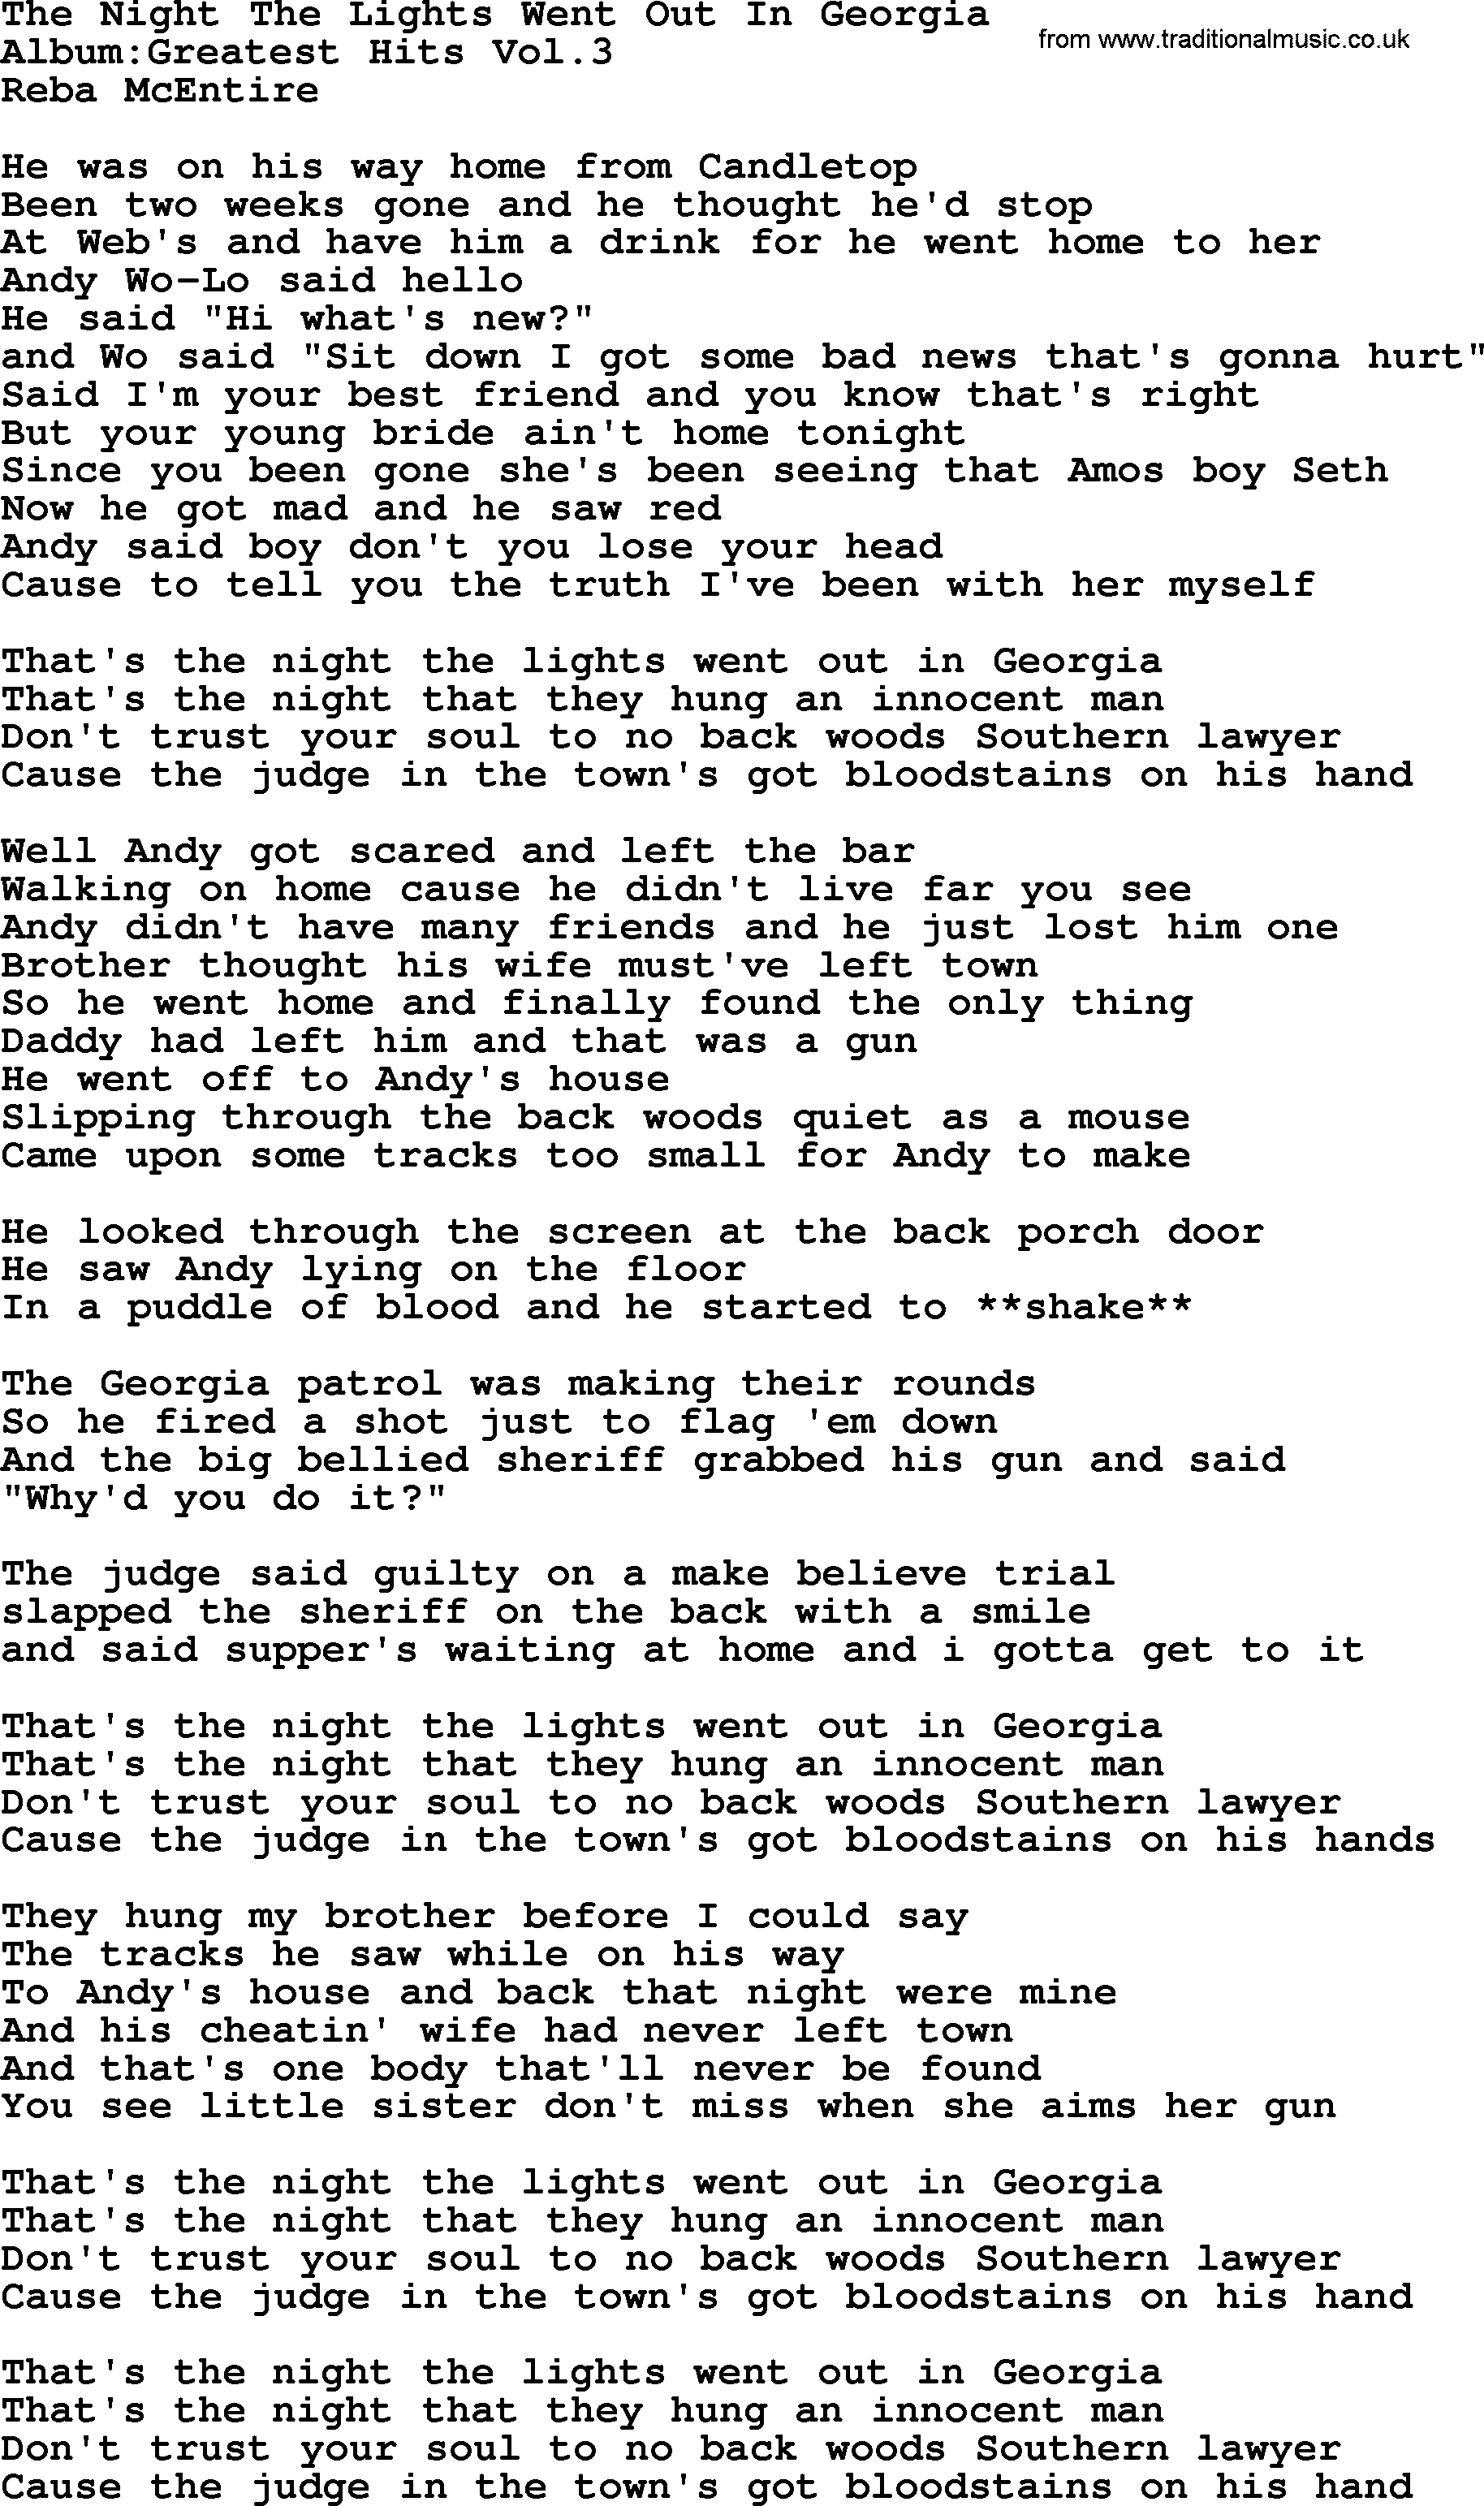 Reba McEntire song: The Night The Lights Went Out In Georgia lyrics